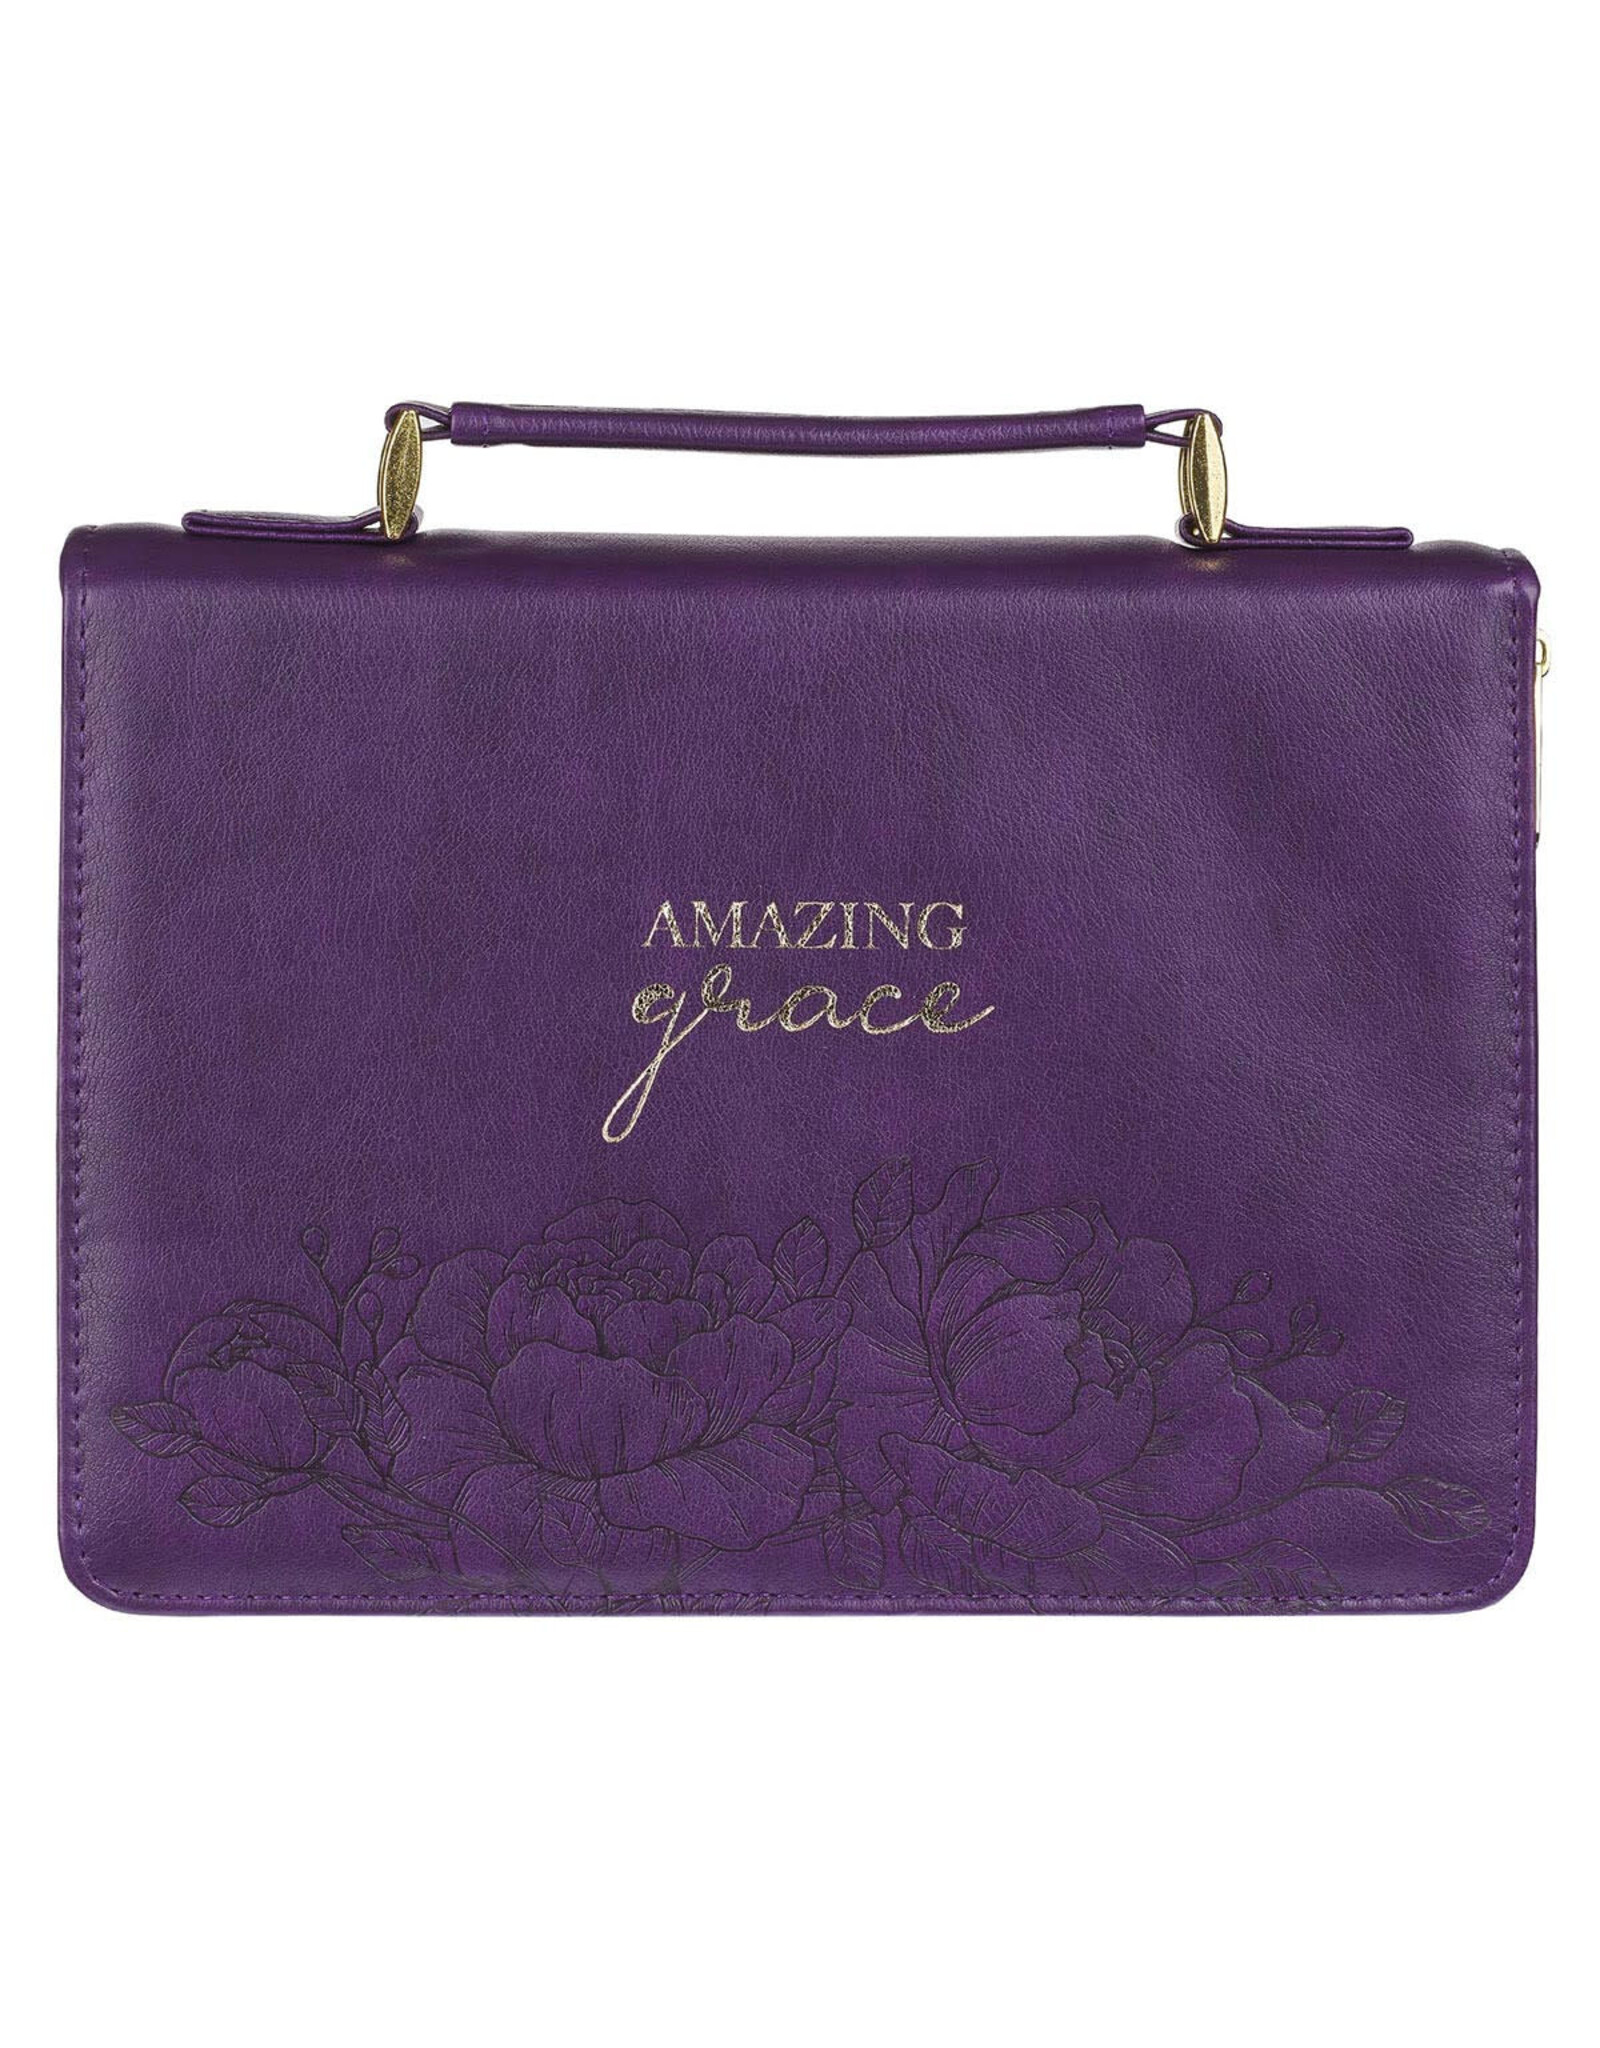 Christian Art Gifts Bible Cover - Amazing Grace, Purple Faux Leather,